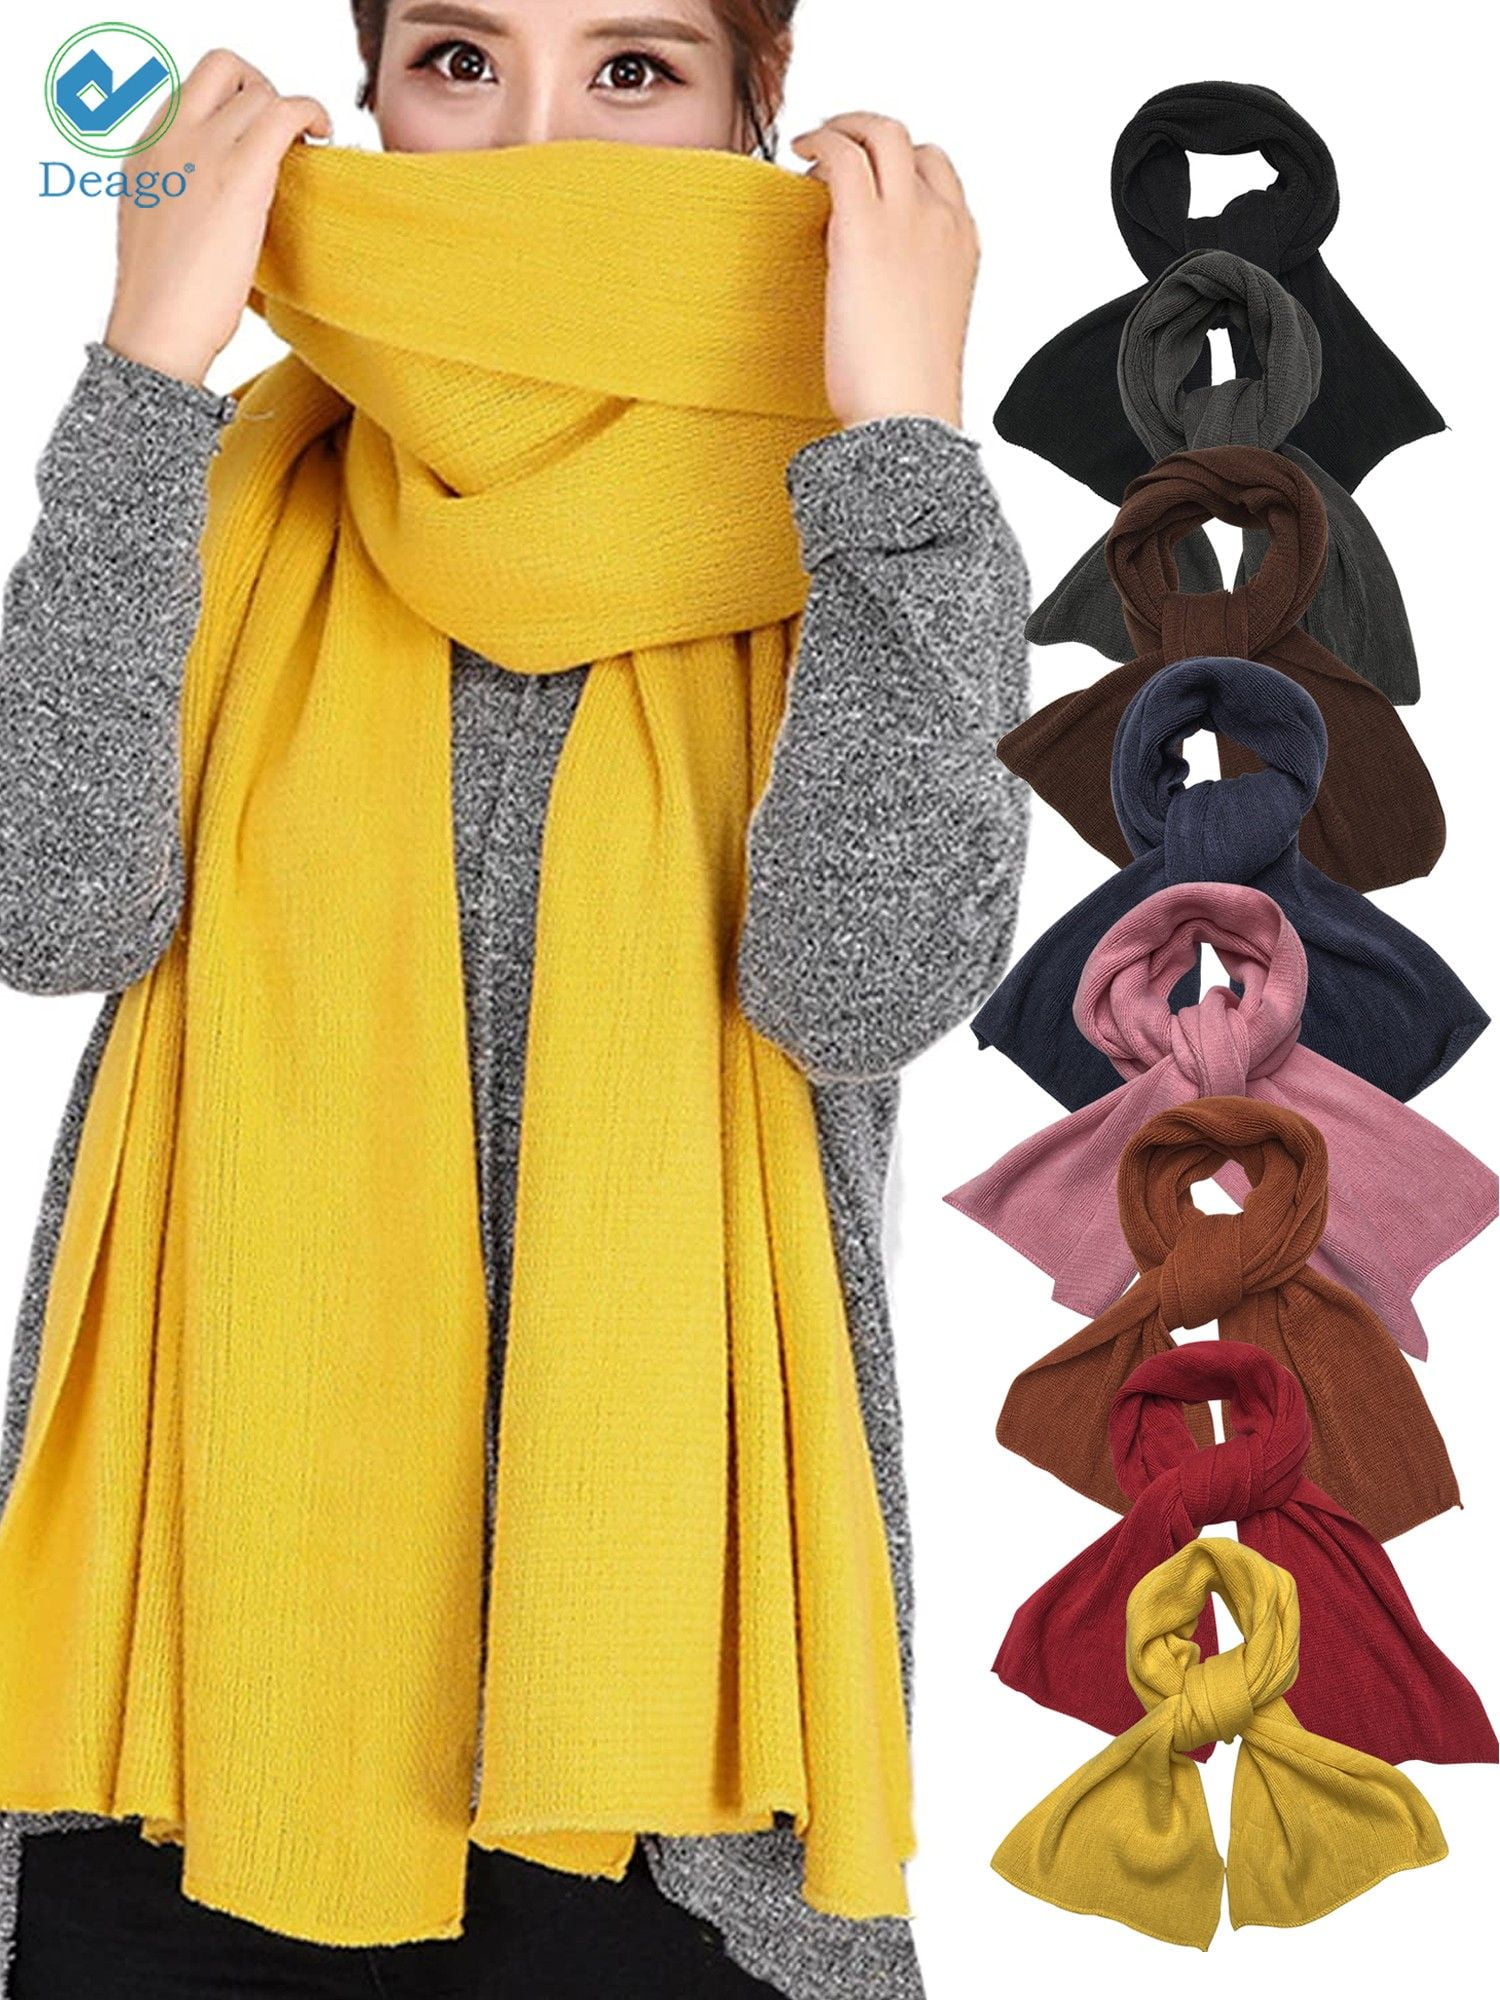 Lightweight Blanket Scarves For Women Large Infinity Fall Winter Fashion Pashmina Warm Chunky Wrap Shawl Travel Scarf